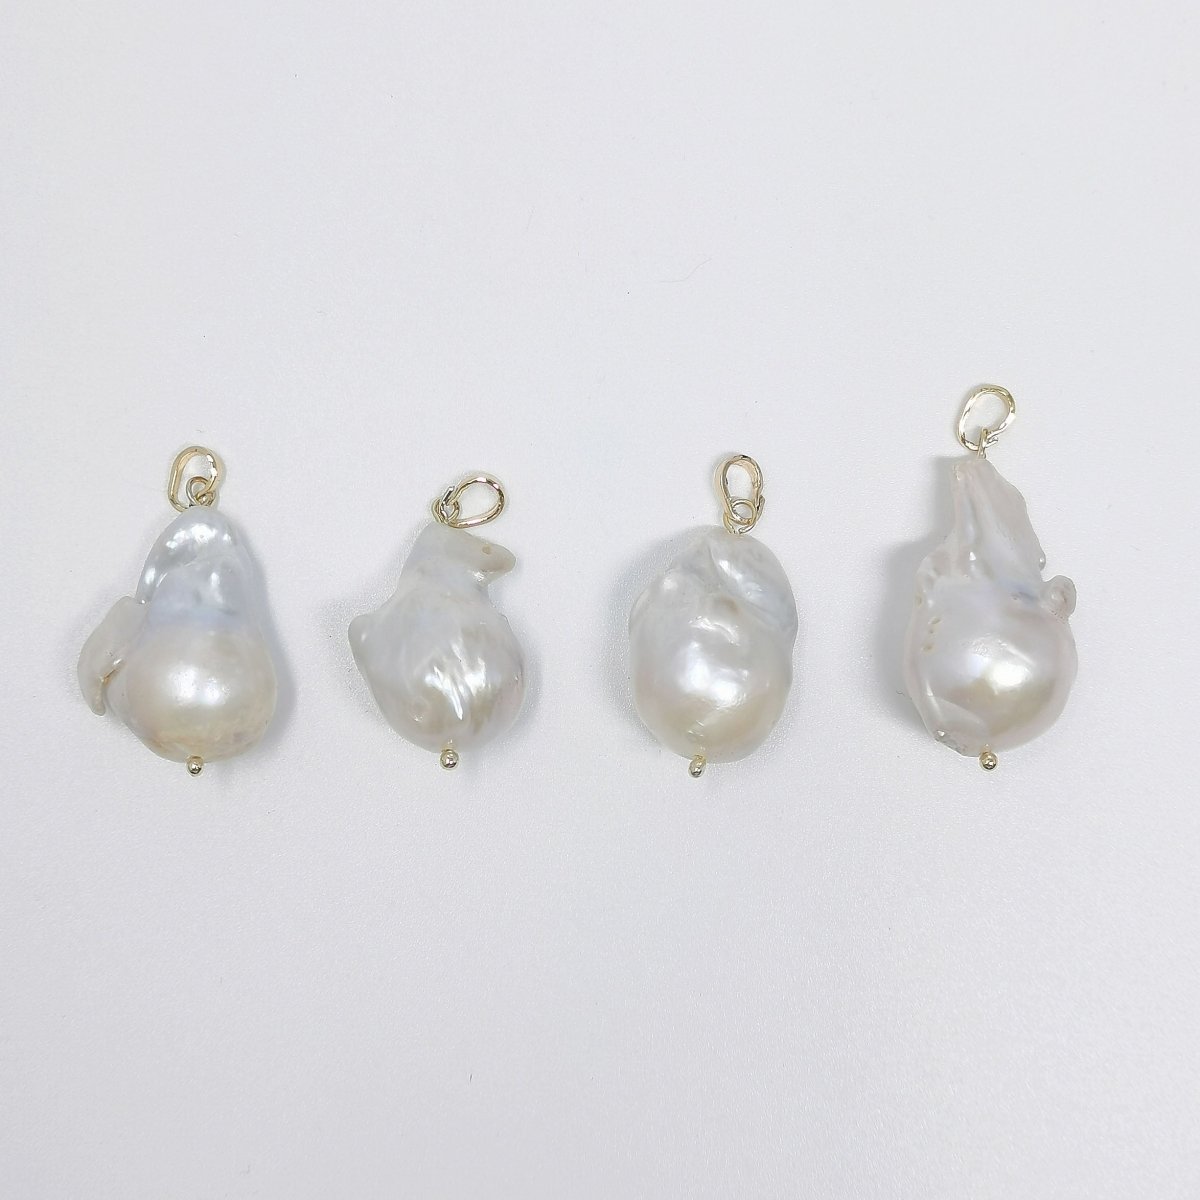 Irregular baroque pearl necklace, Freeform Keishi pearl charm for Necklace Component P-1566 - DLUXCA